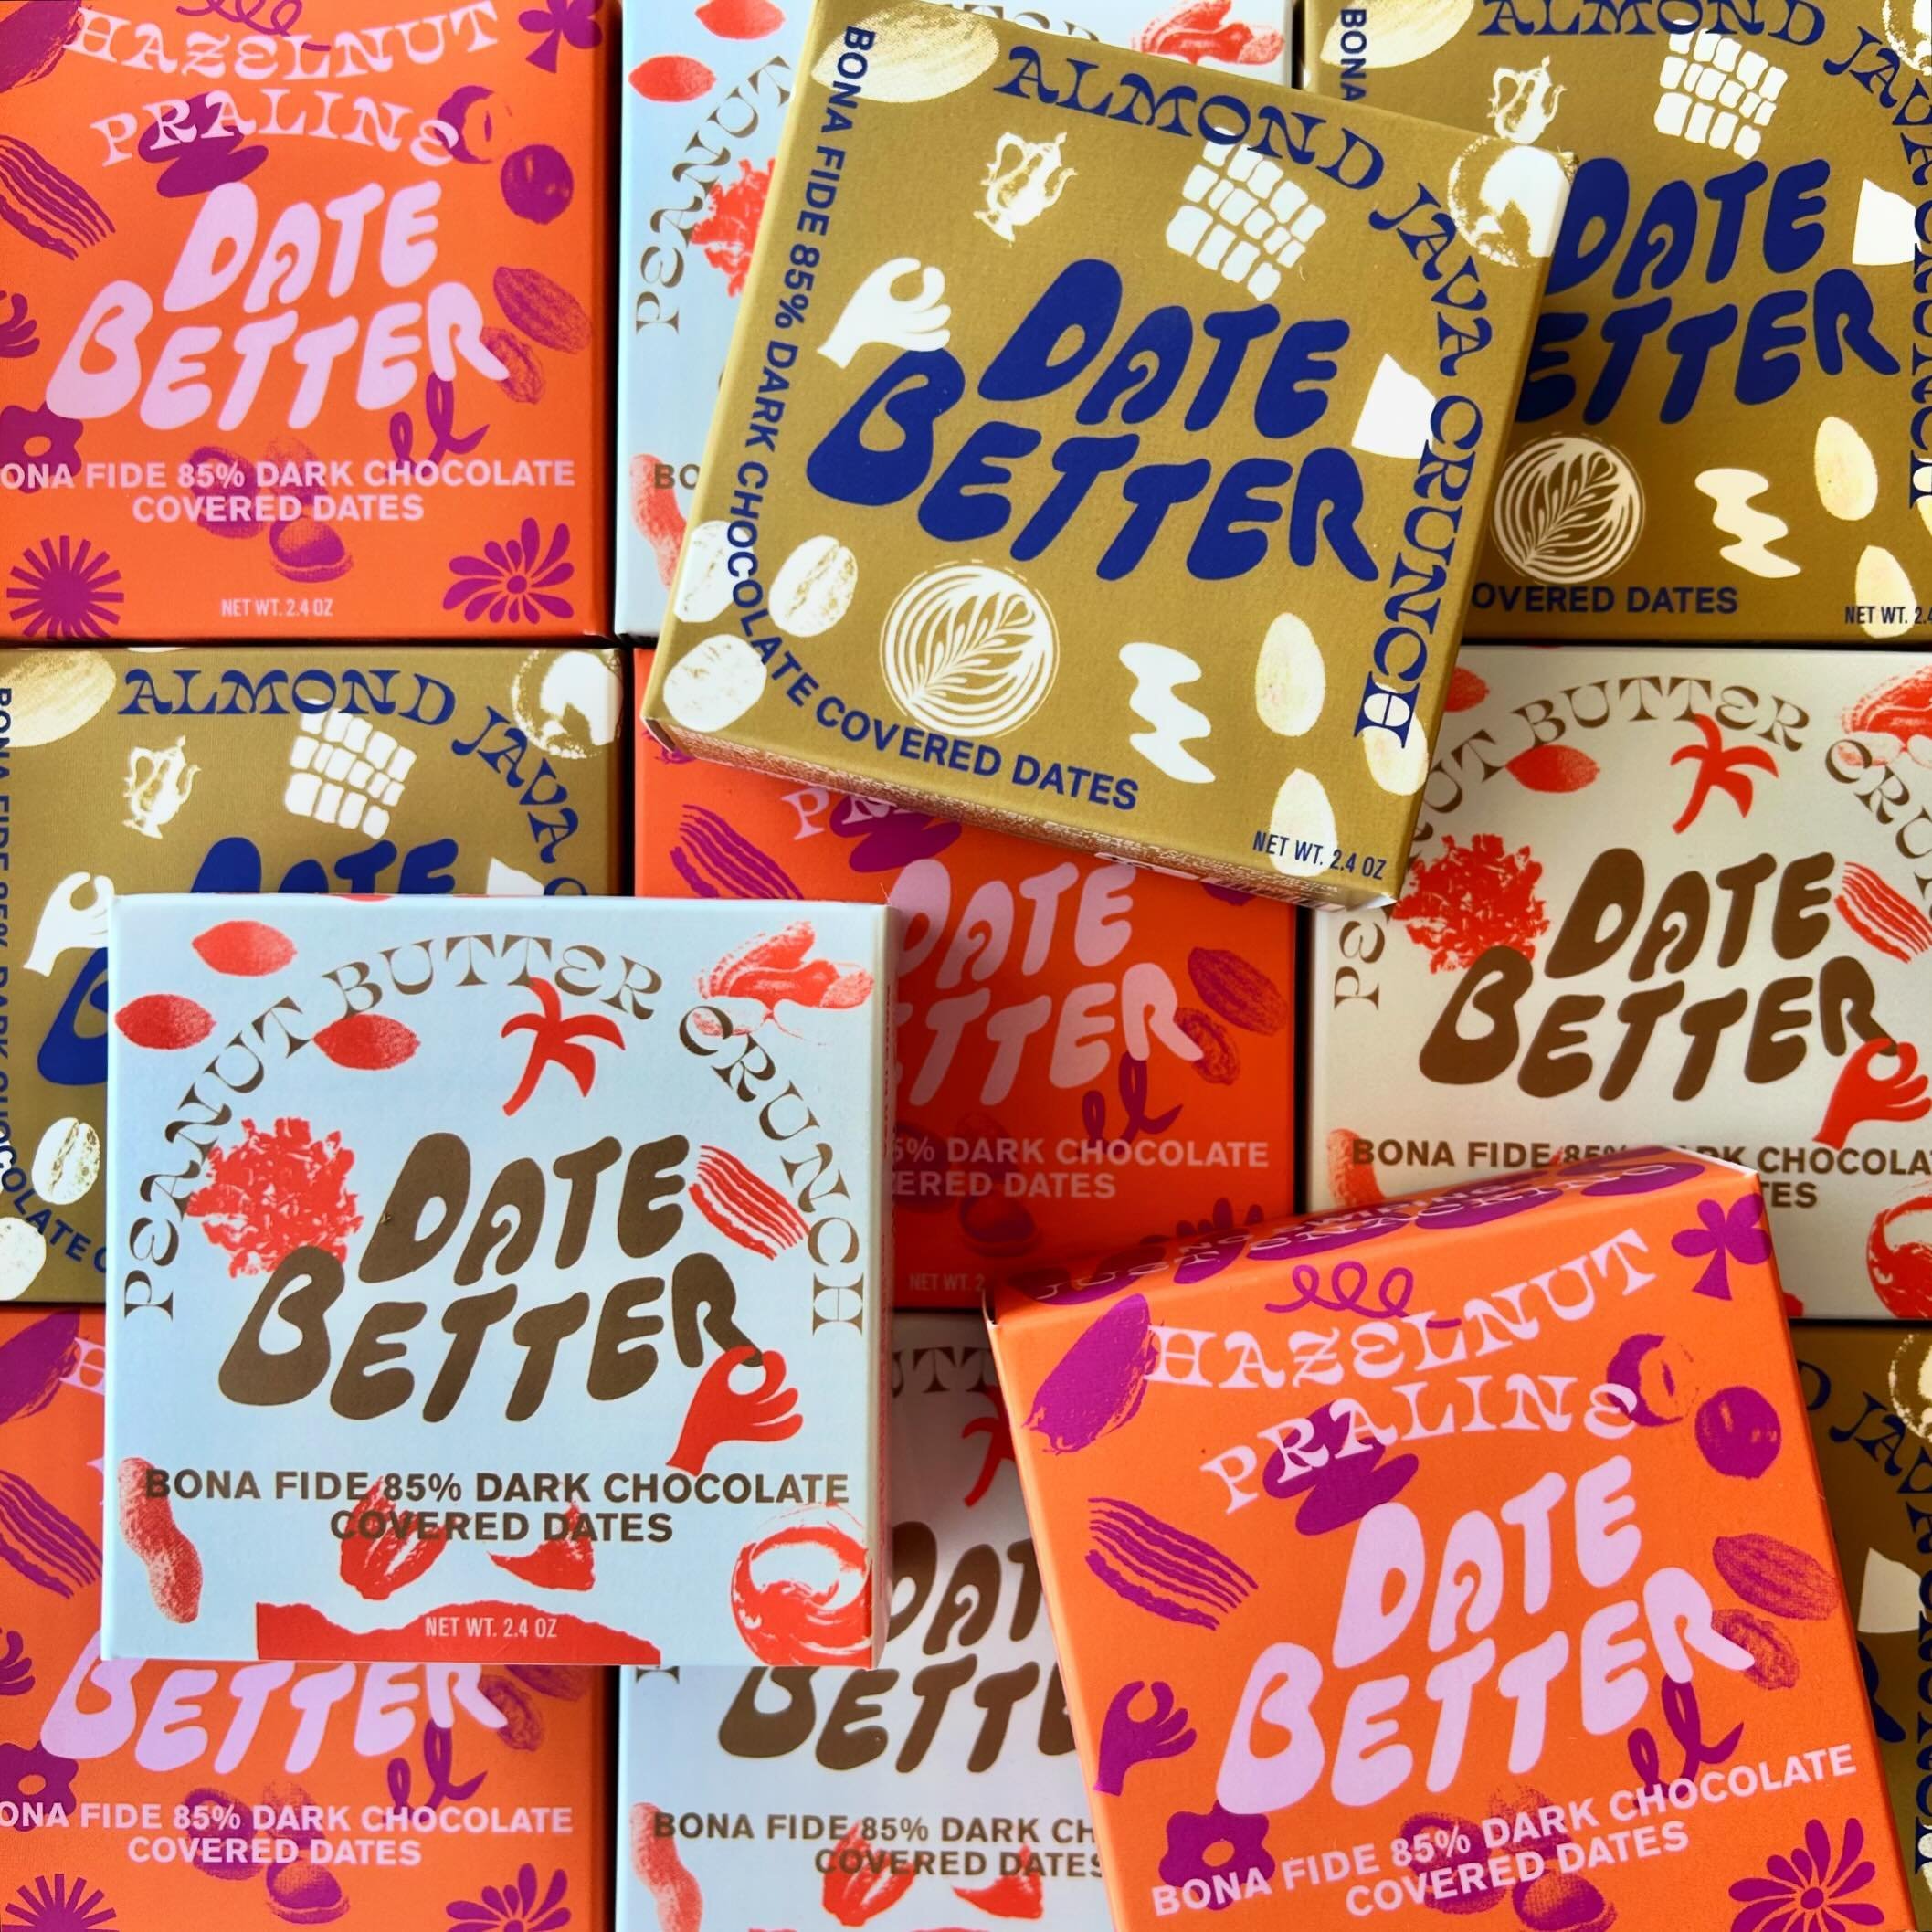 Guess who&rsquo;s back&hellip; 👀 Snack better with @datebettersnacks &mdash; chocolate covered dates with their own unique flavor!